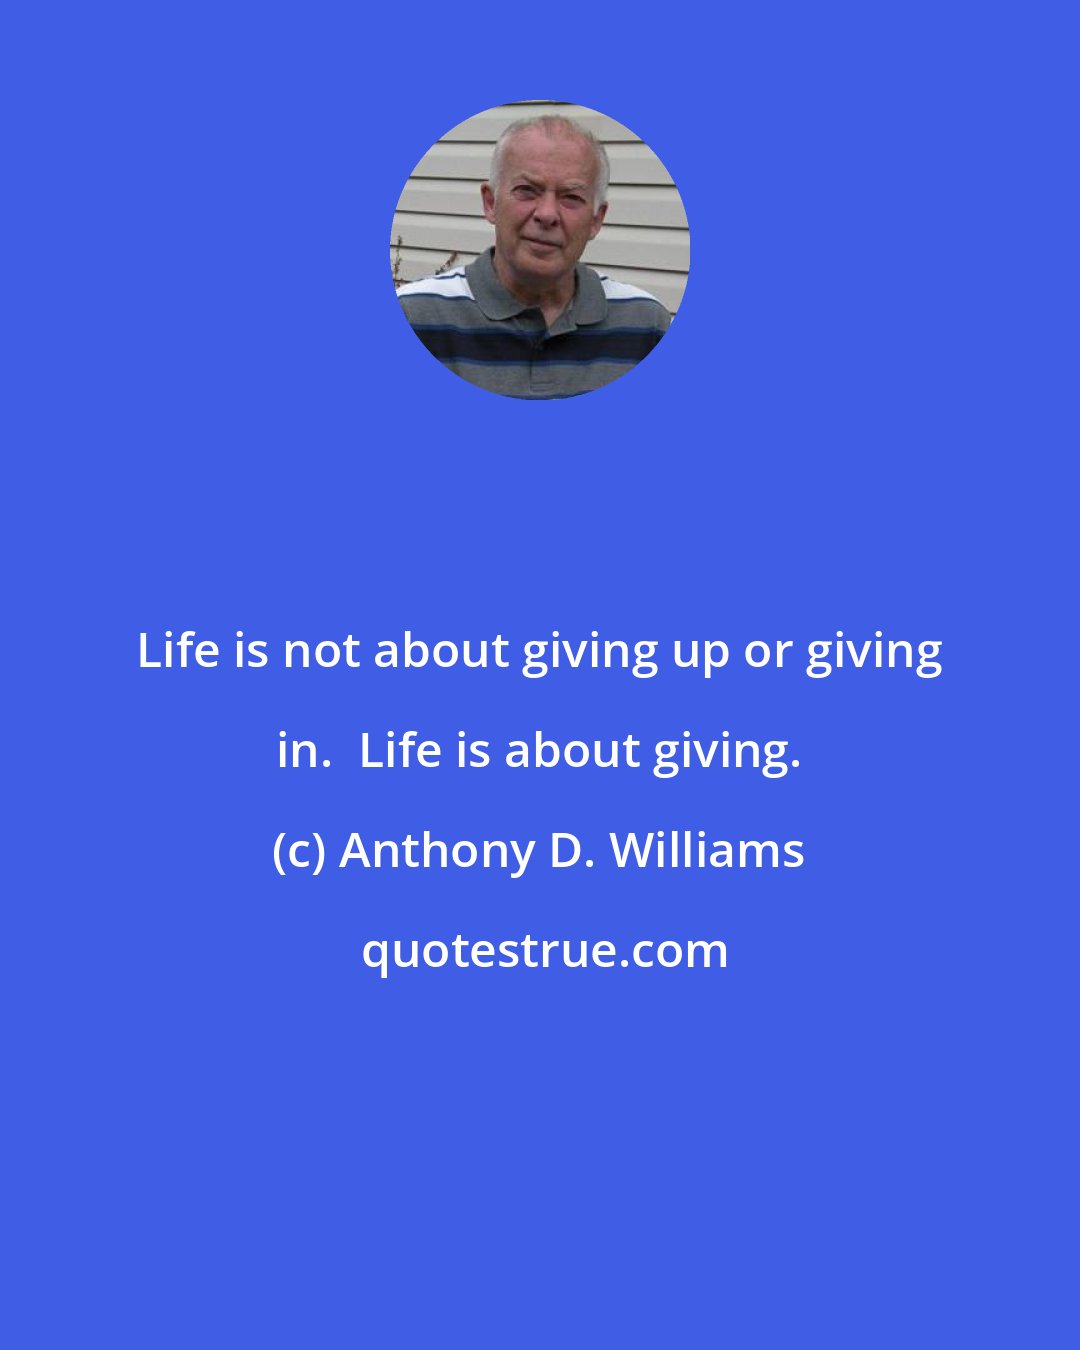 Anthony D. Williams: Life is not about giving up or giving in.  Life is about giving.